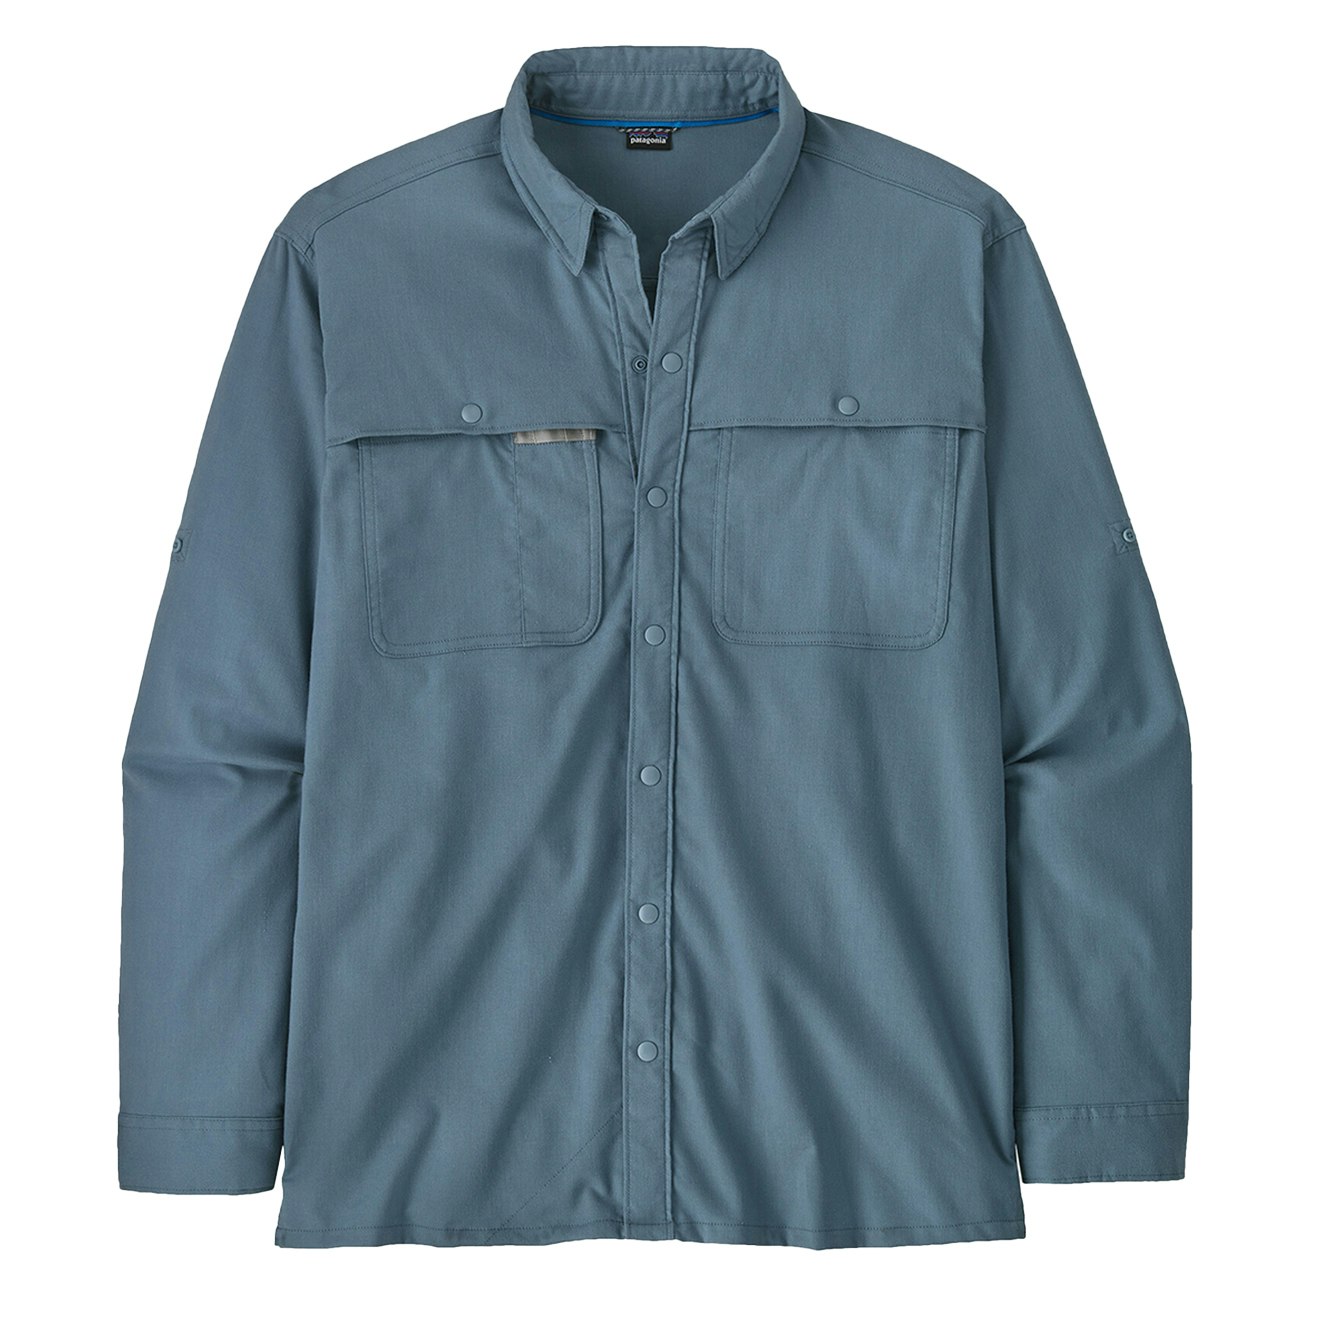 Patagonia Early Rise stretch shirt - Light plume Grey